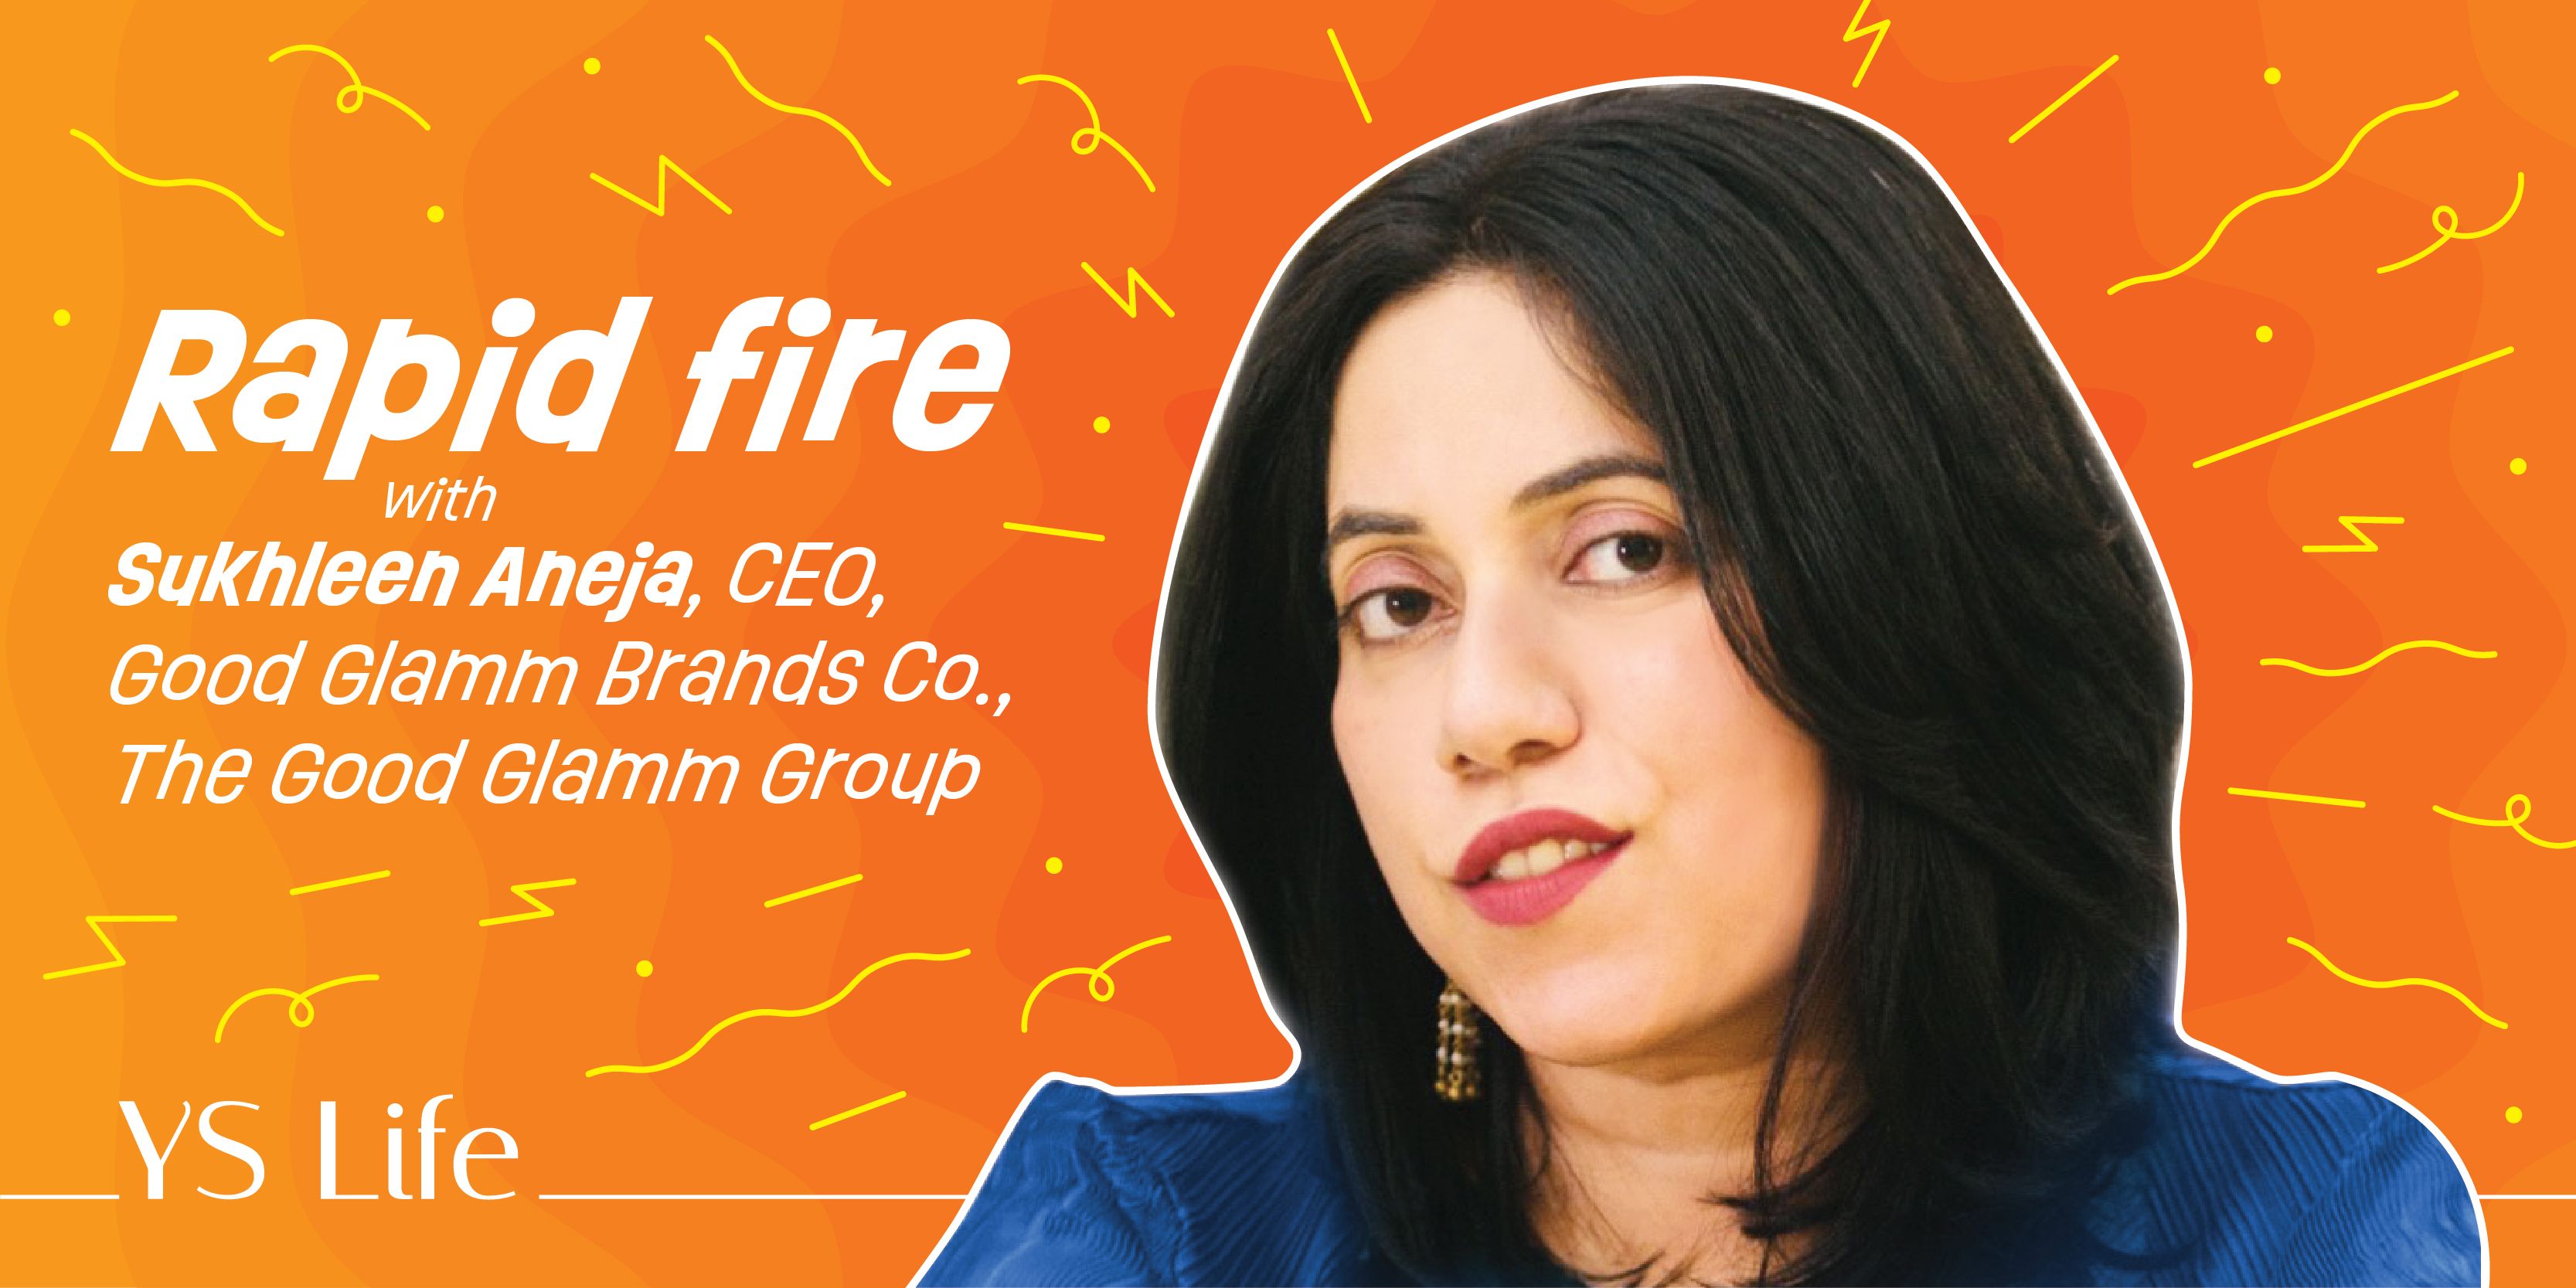 Rapid Fire with Sukhleen Aneja, CEO of Good Brands Co. at The Good Glamm Group